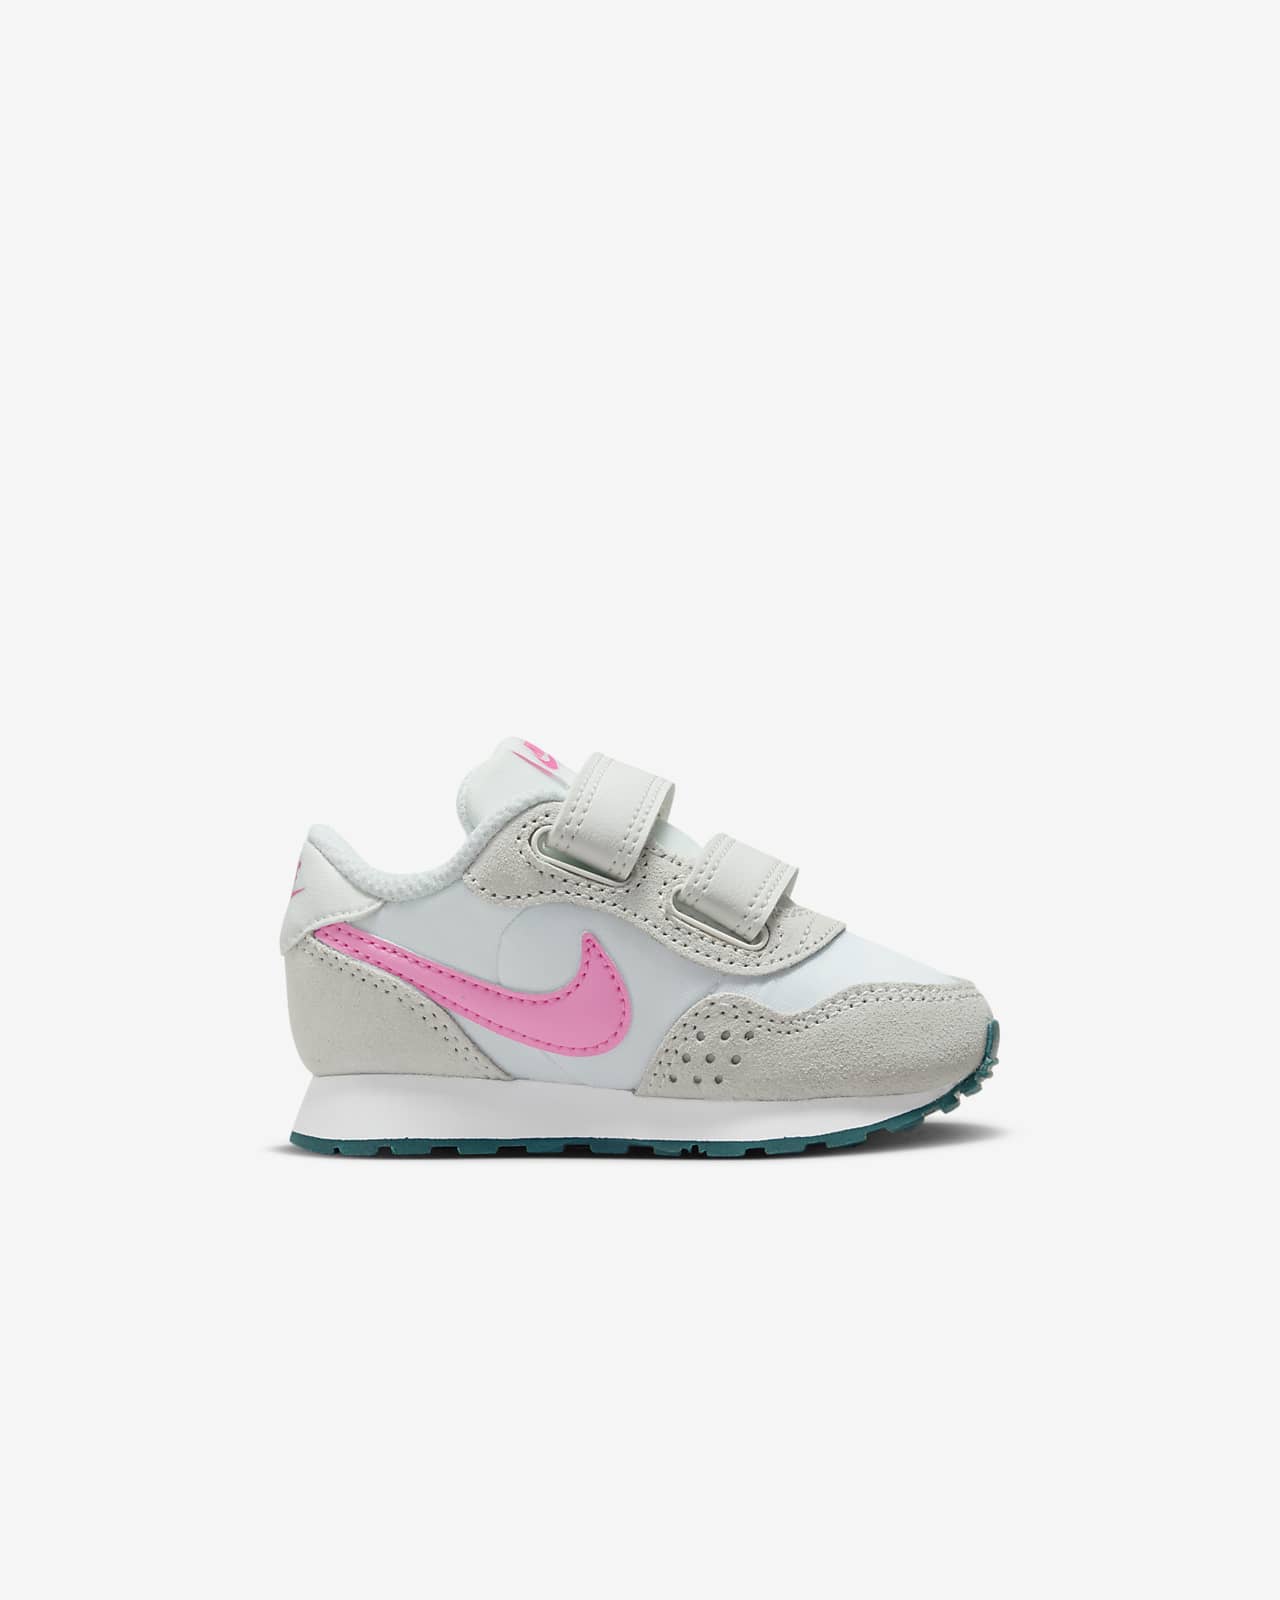 Baby/Toddler Shoes. MD Nike Valiant